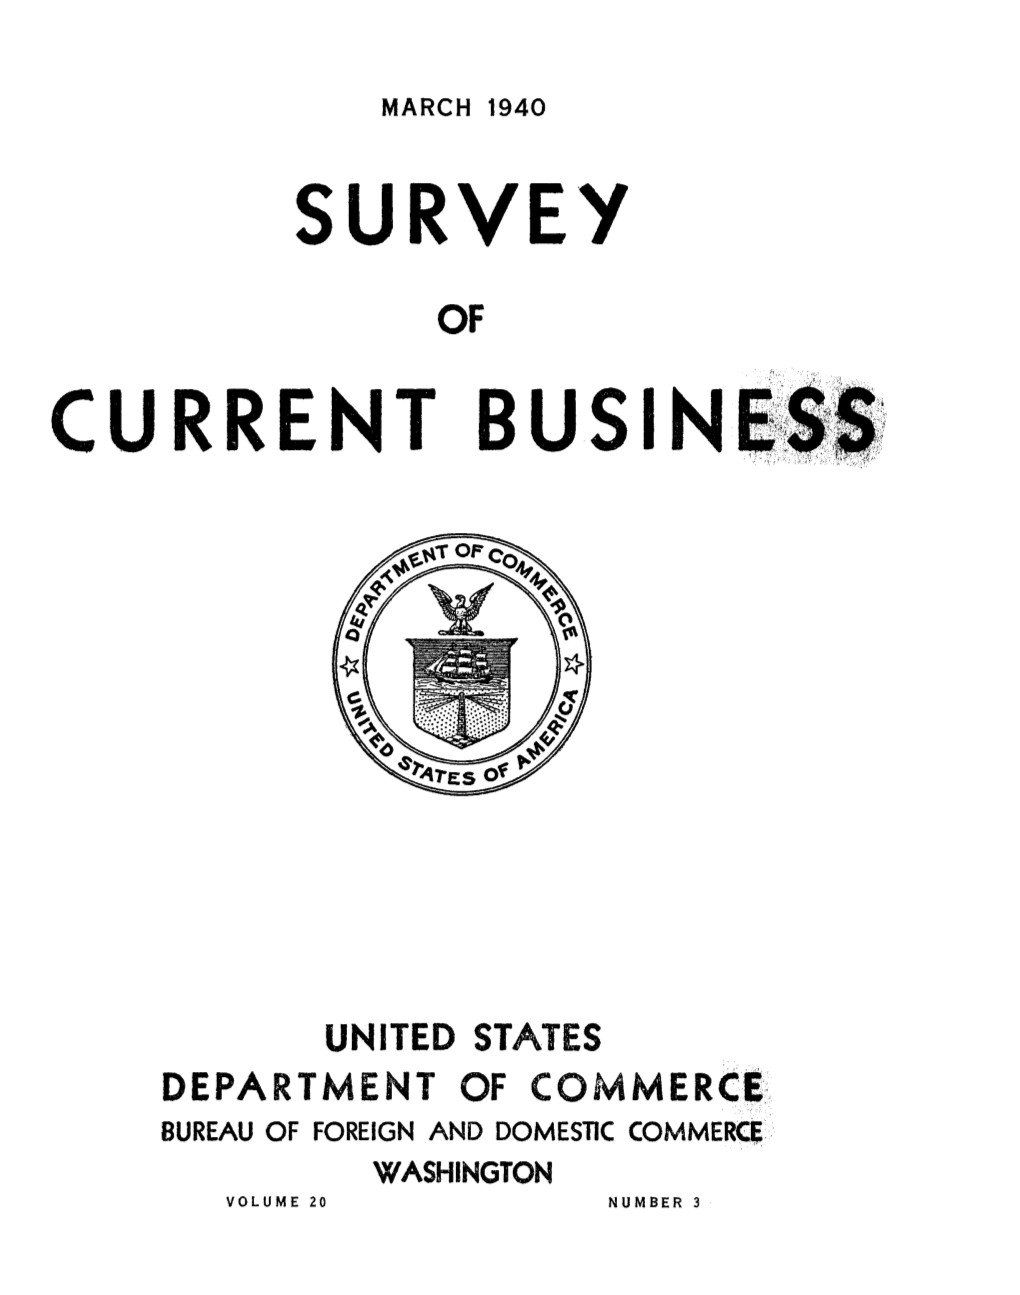 SURVEY of CURRENT BUSINESS March 1940